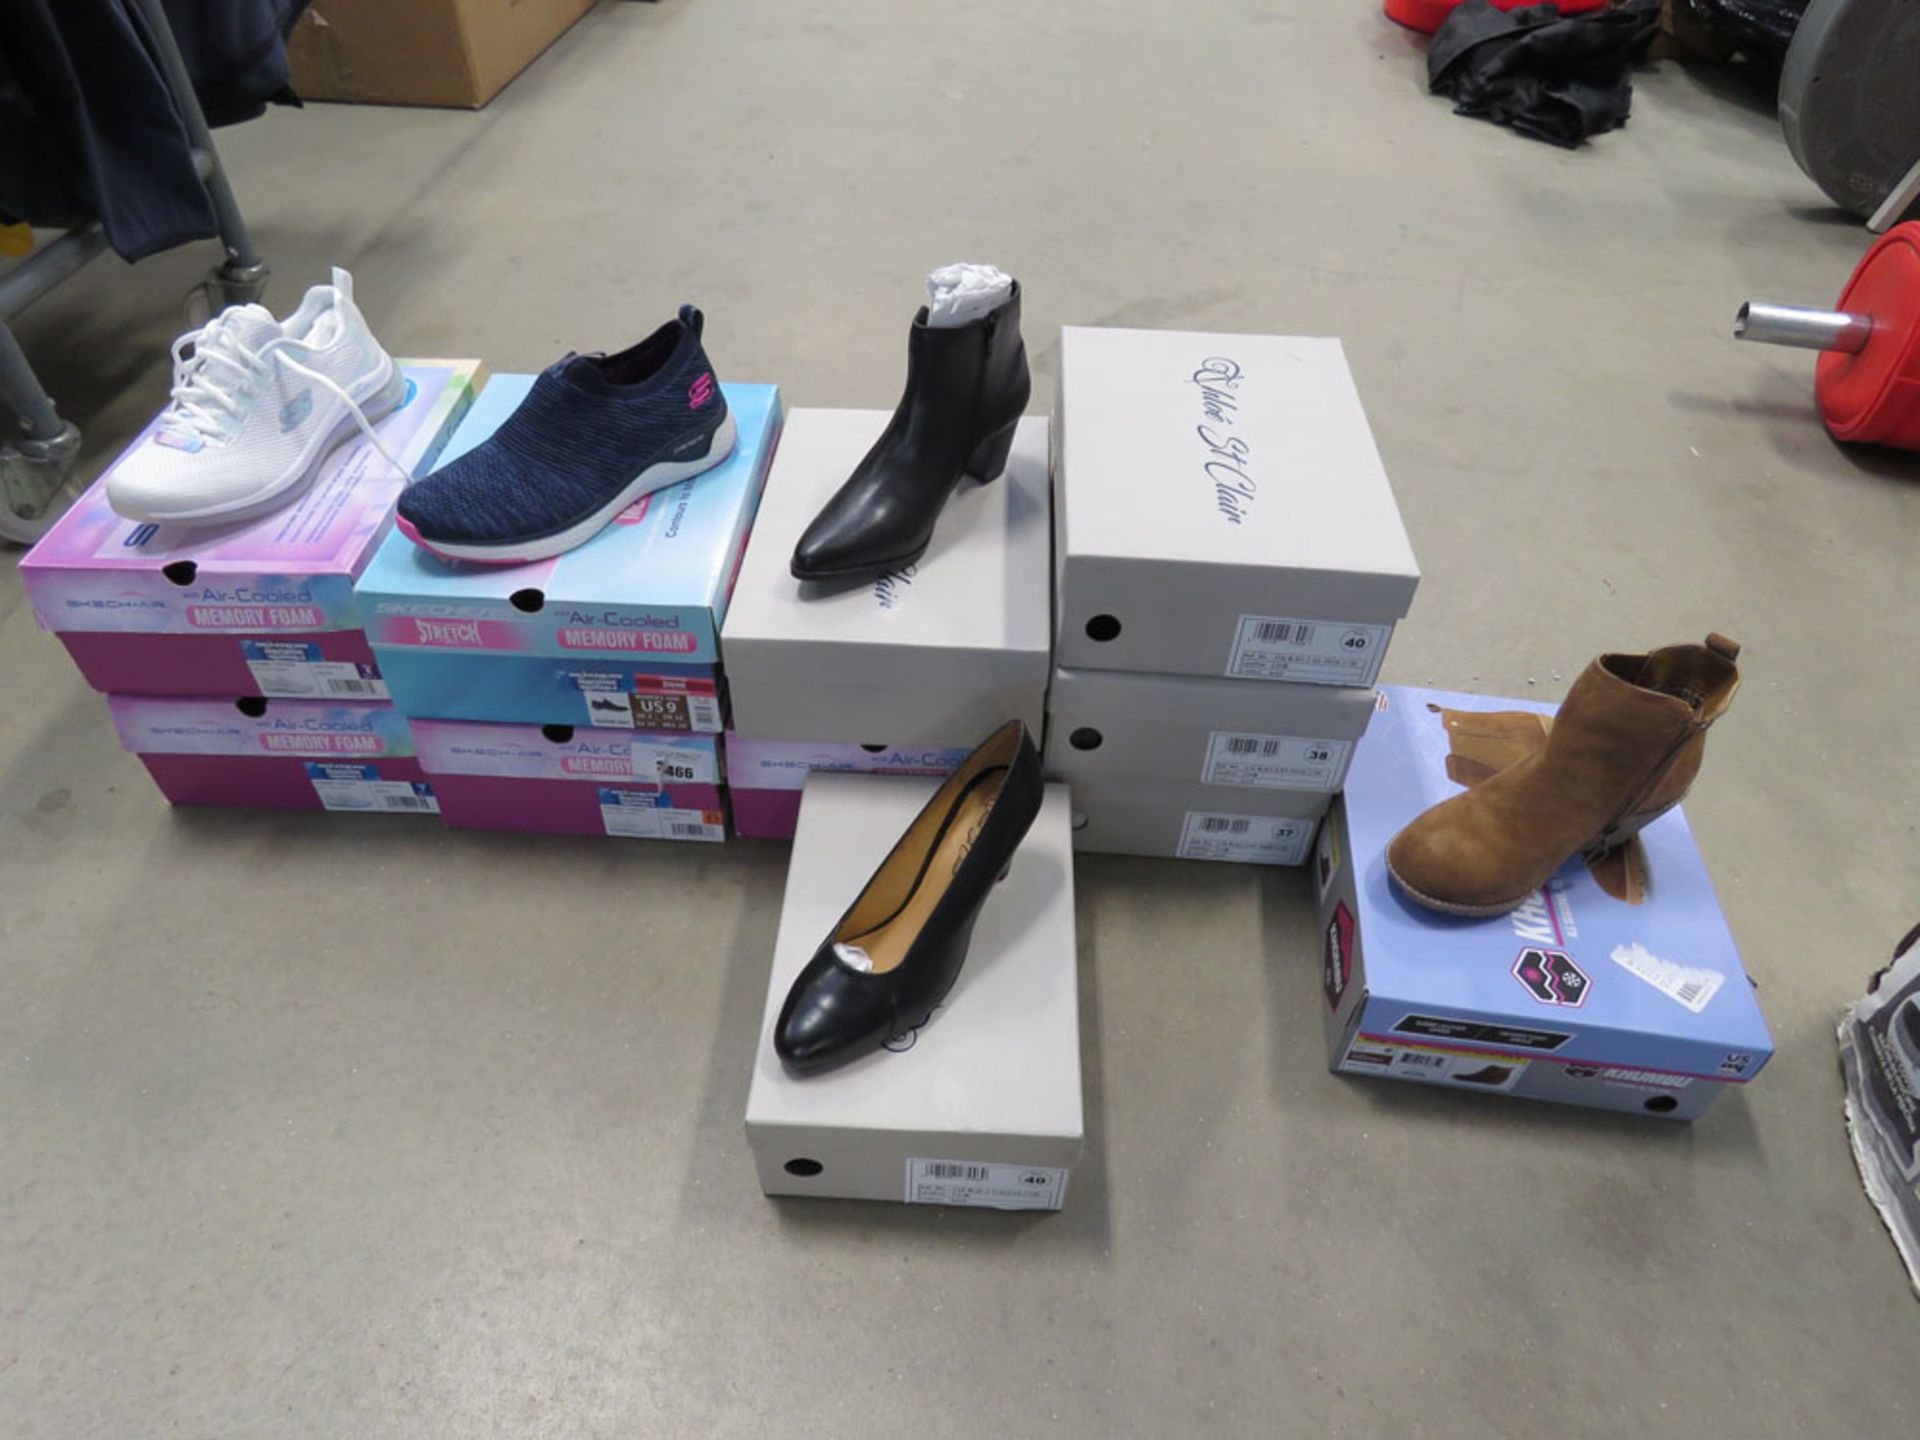 3466 5 boxed pairs of memory foam Sketchers shoes plus 5 boxed pairs of ladies boots and pair of